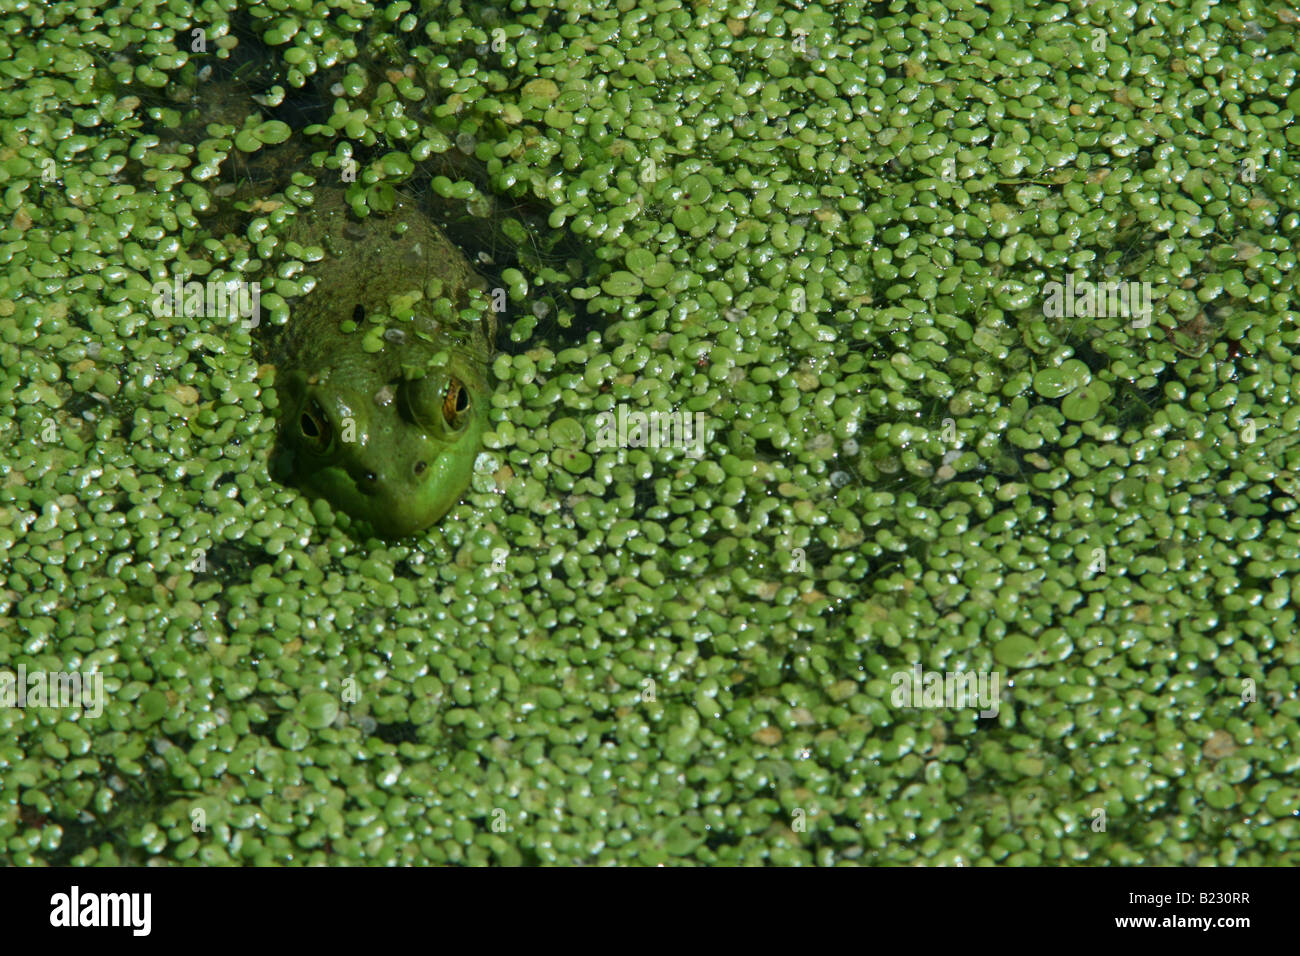 Green Frog in Pond with Duckweed E USA Stock Photo